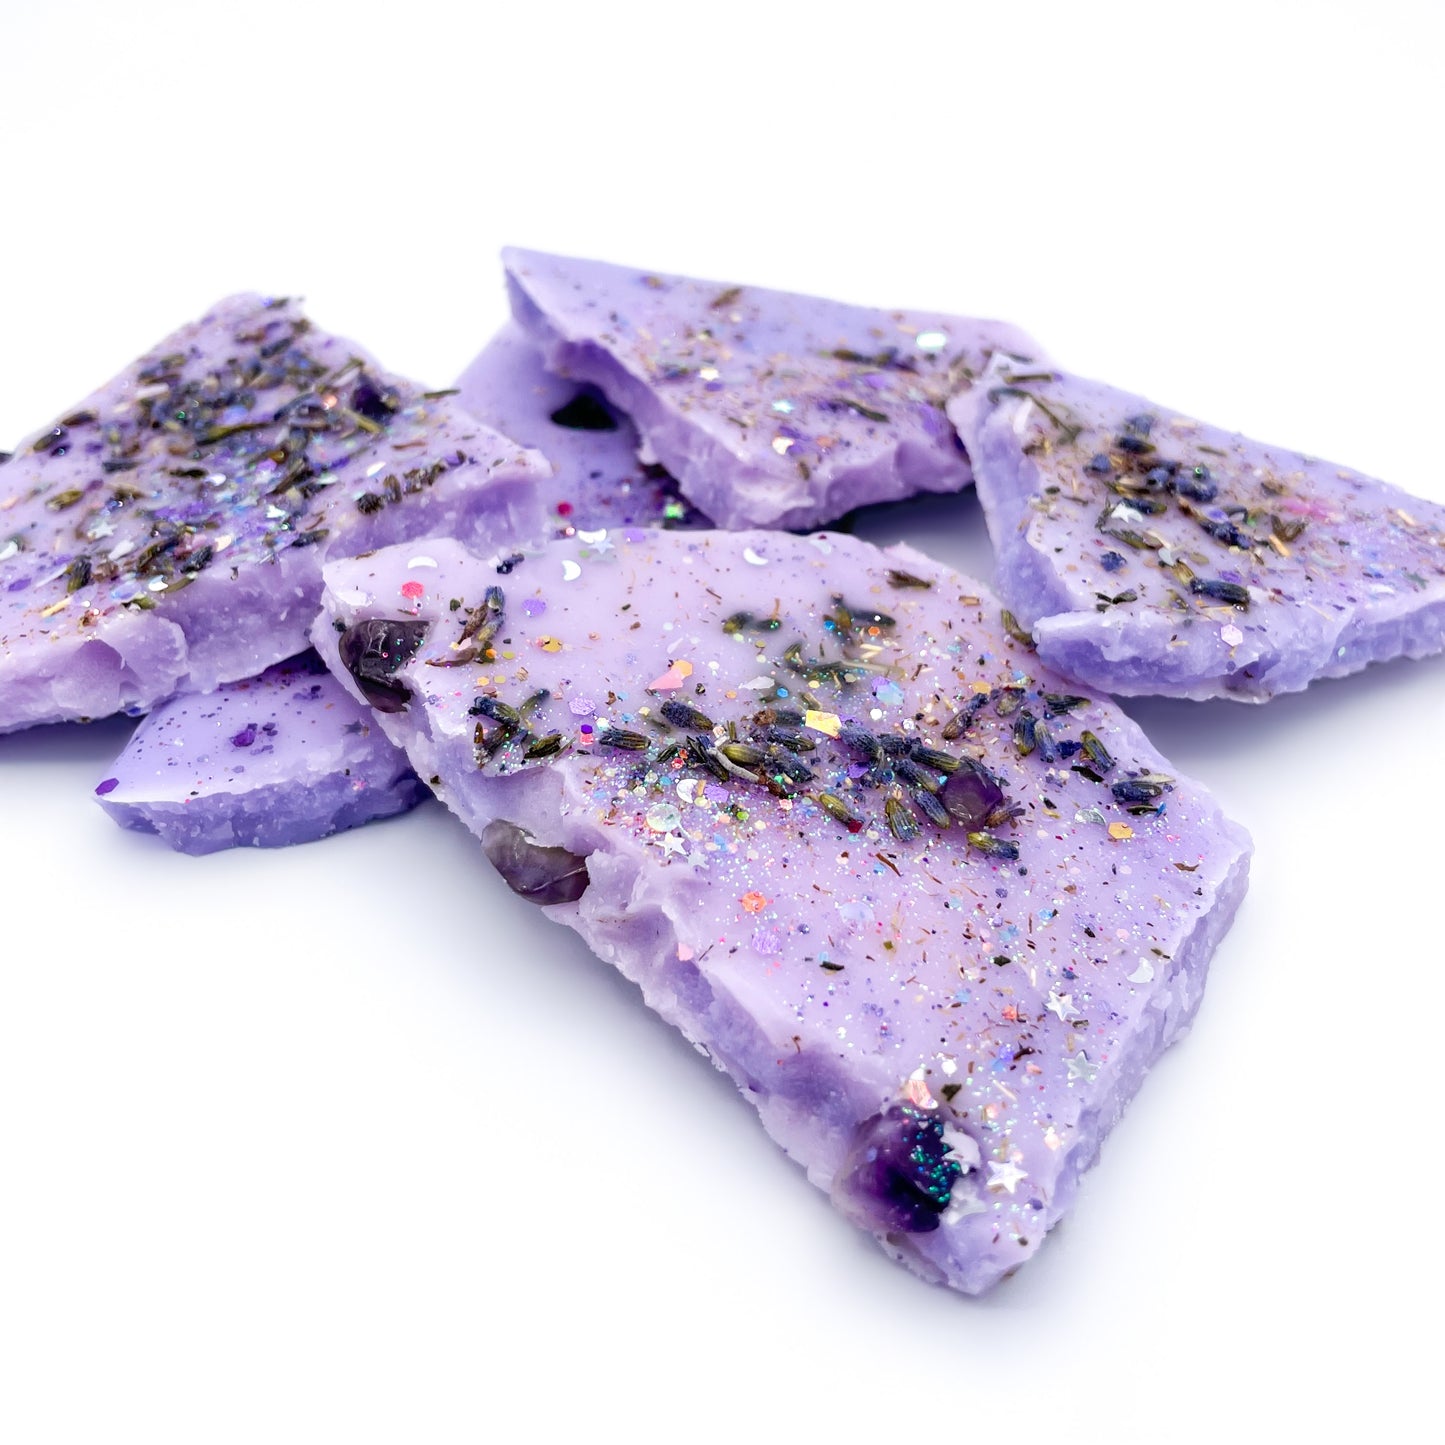 Crystal infused wax brittle